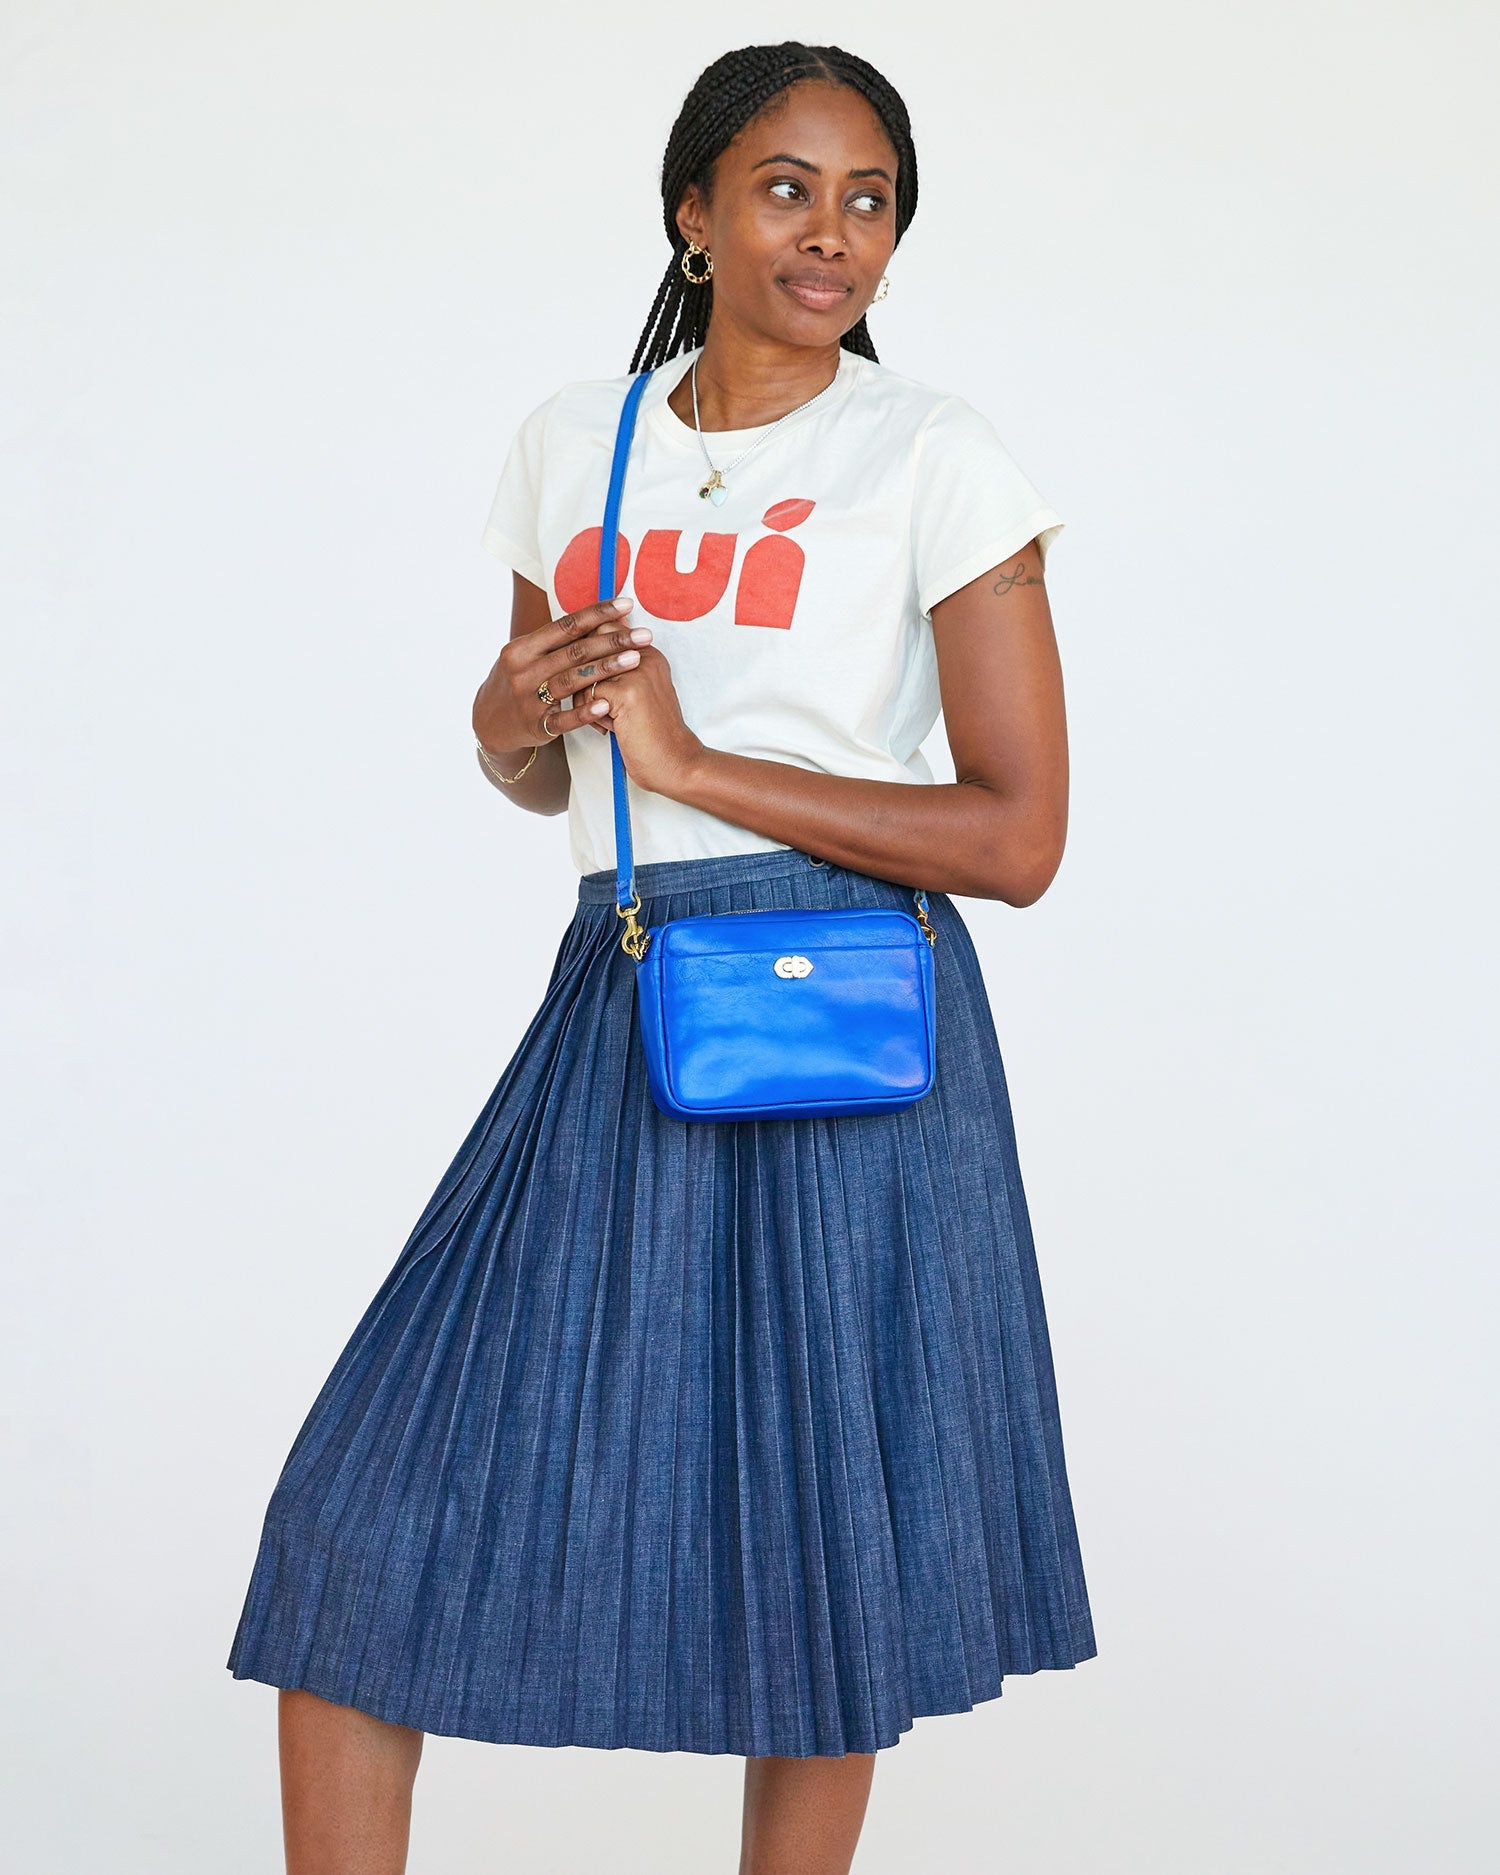 mecca wearing the Electric Blue Turnlock Midi Sac with both of her hands on its crossbody strap. she's looking off to her left